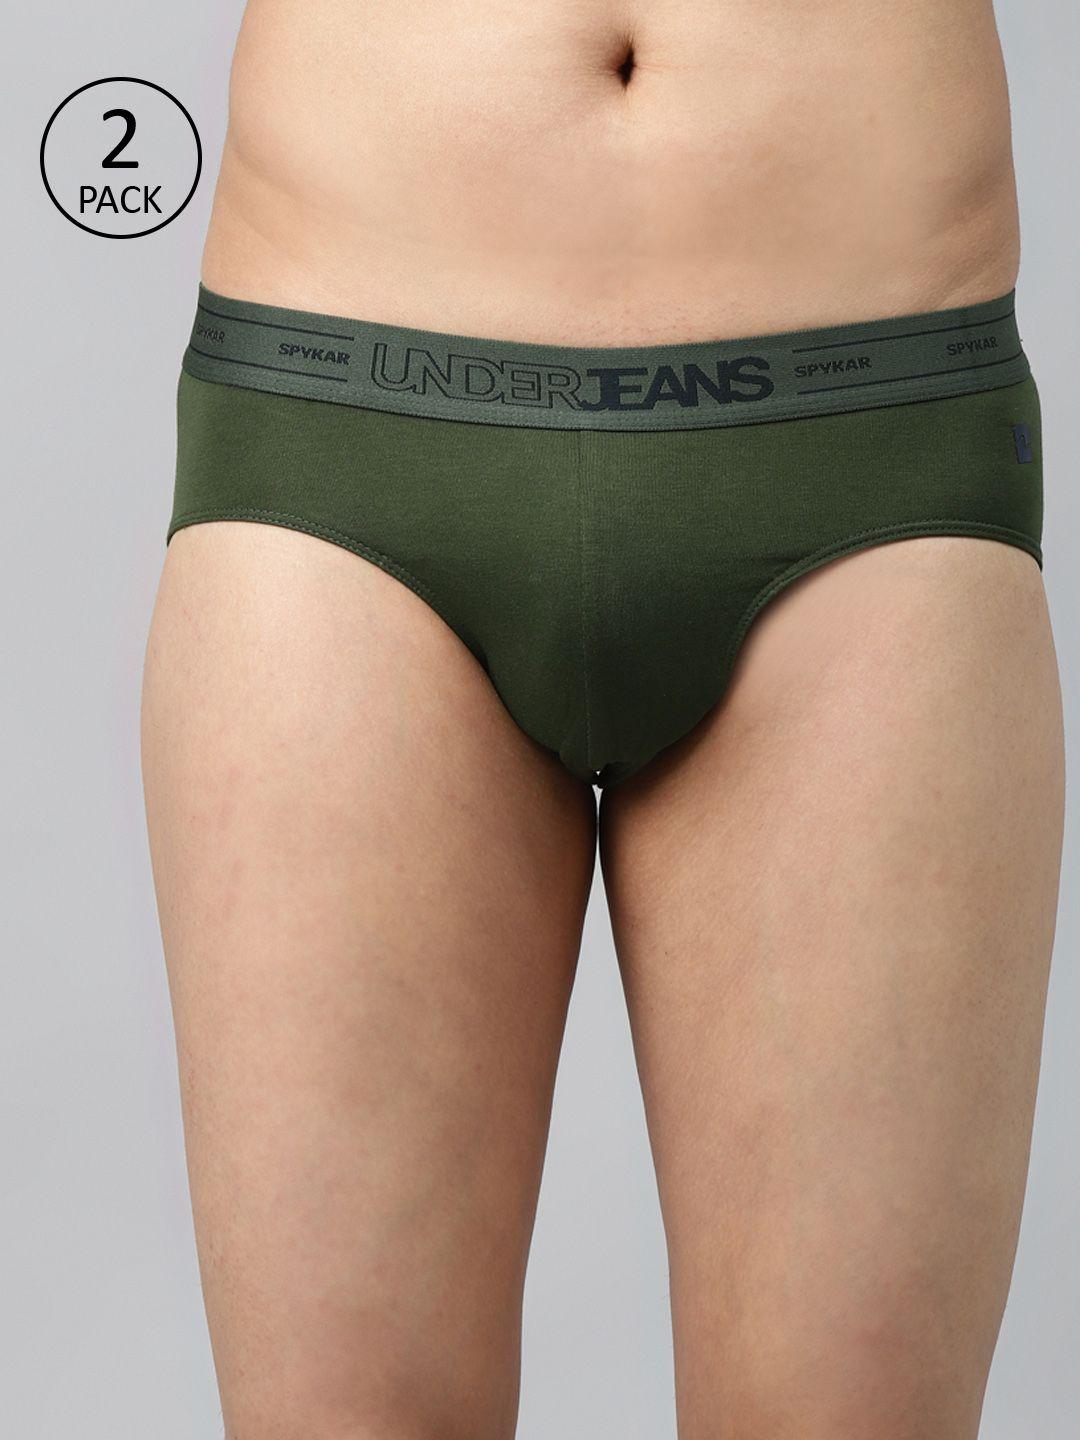 underjeans by spykar men pack of 2 olive green solid briefs 8907966428409